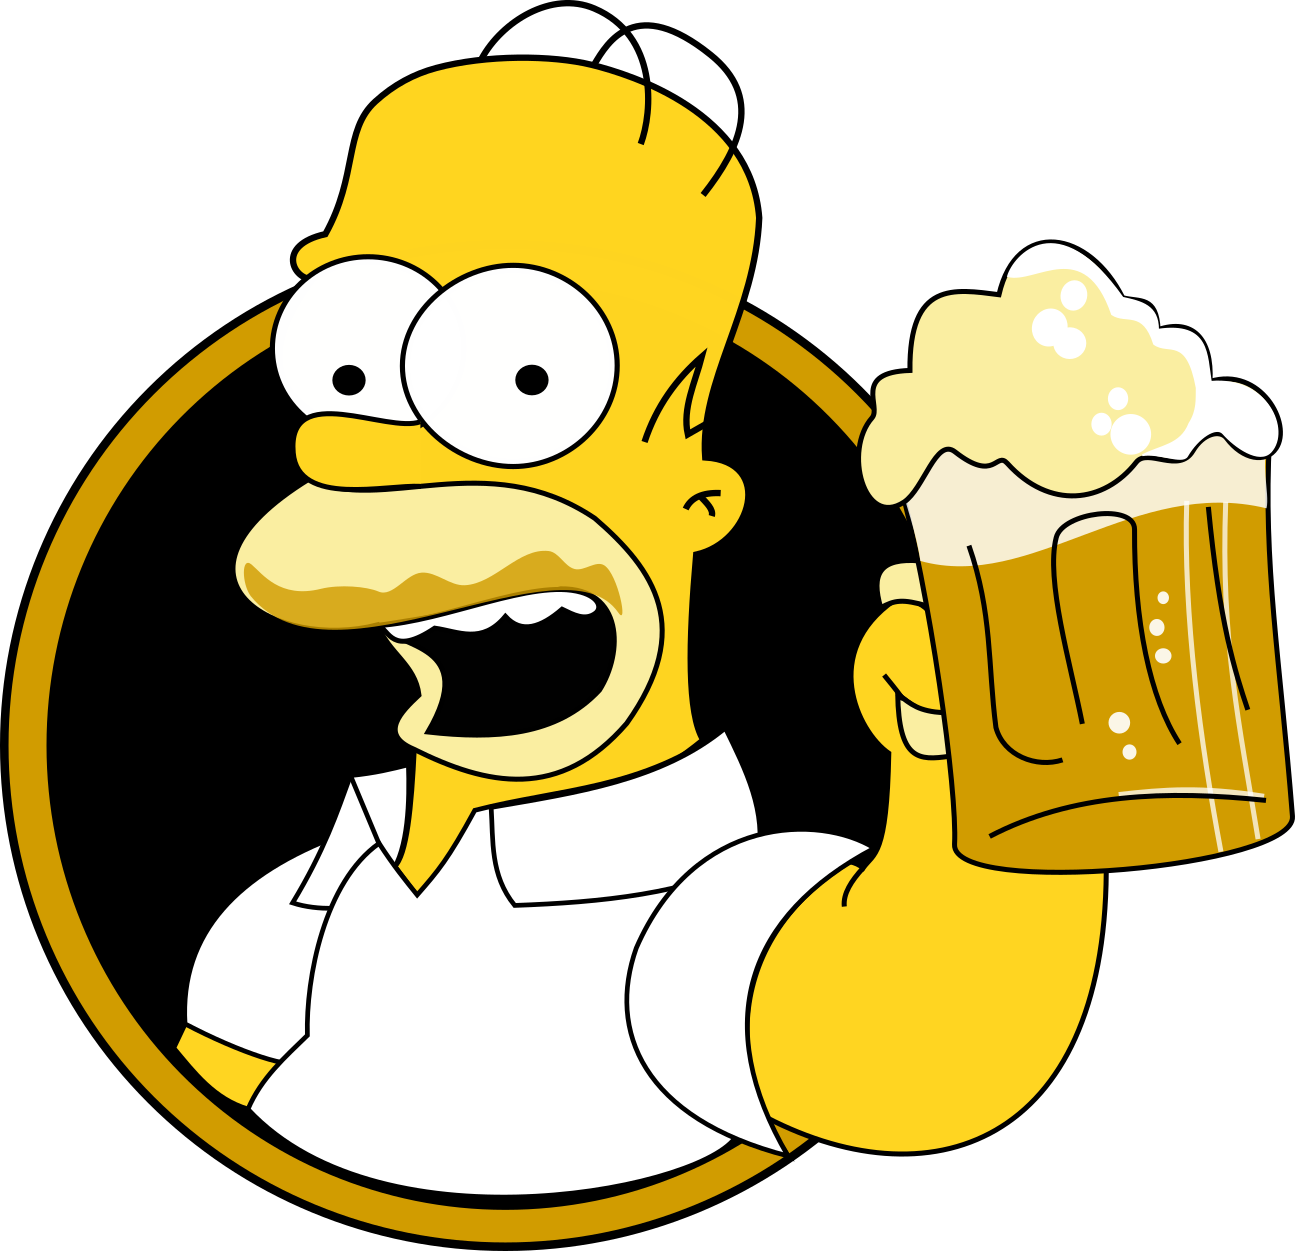 Cartoon Character Holding A Beer